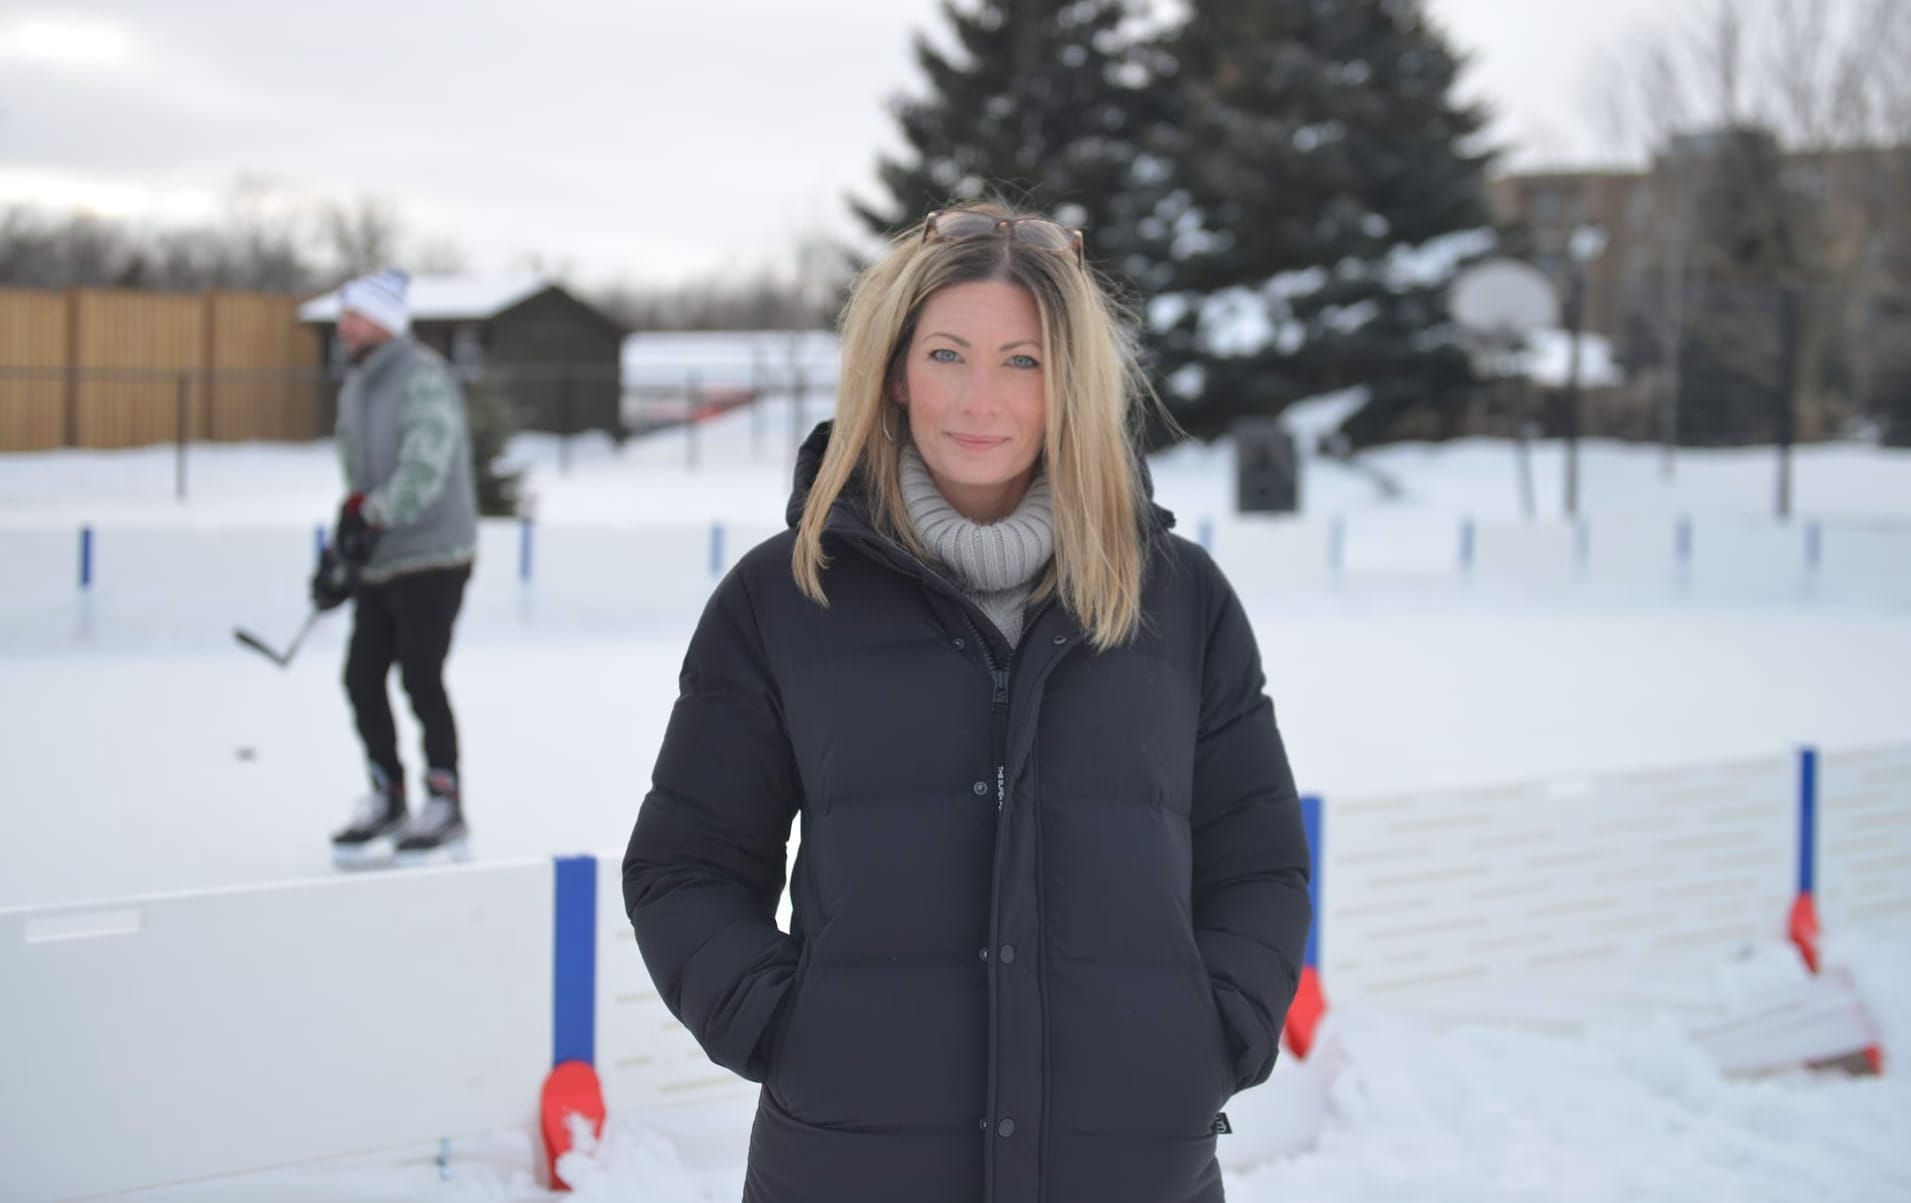 Winter allows for opening of revamped St. Jacobs rink, but weather can be fickle